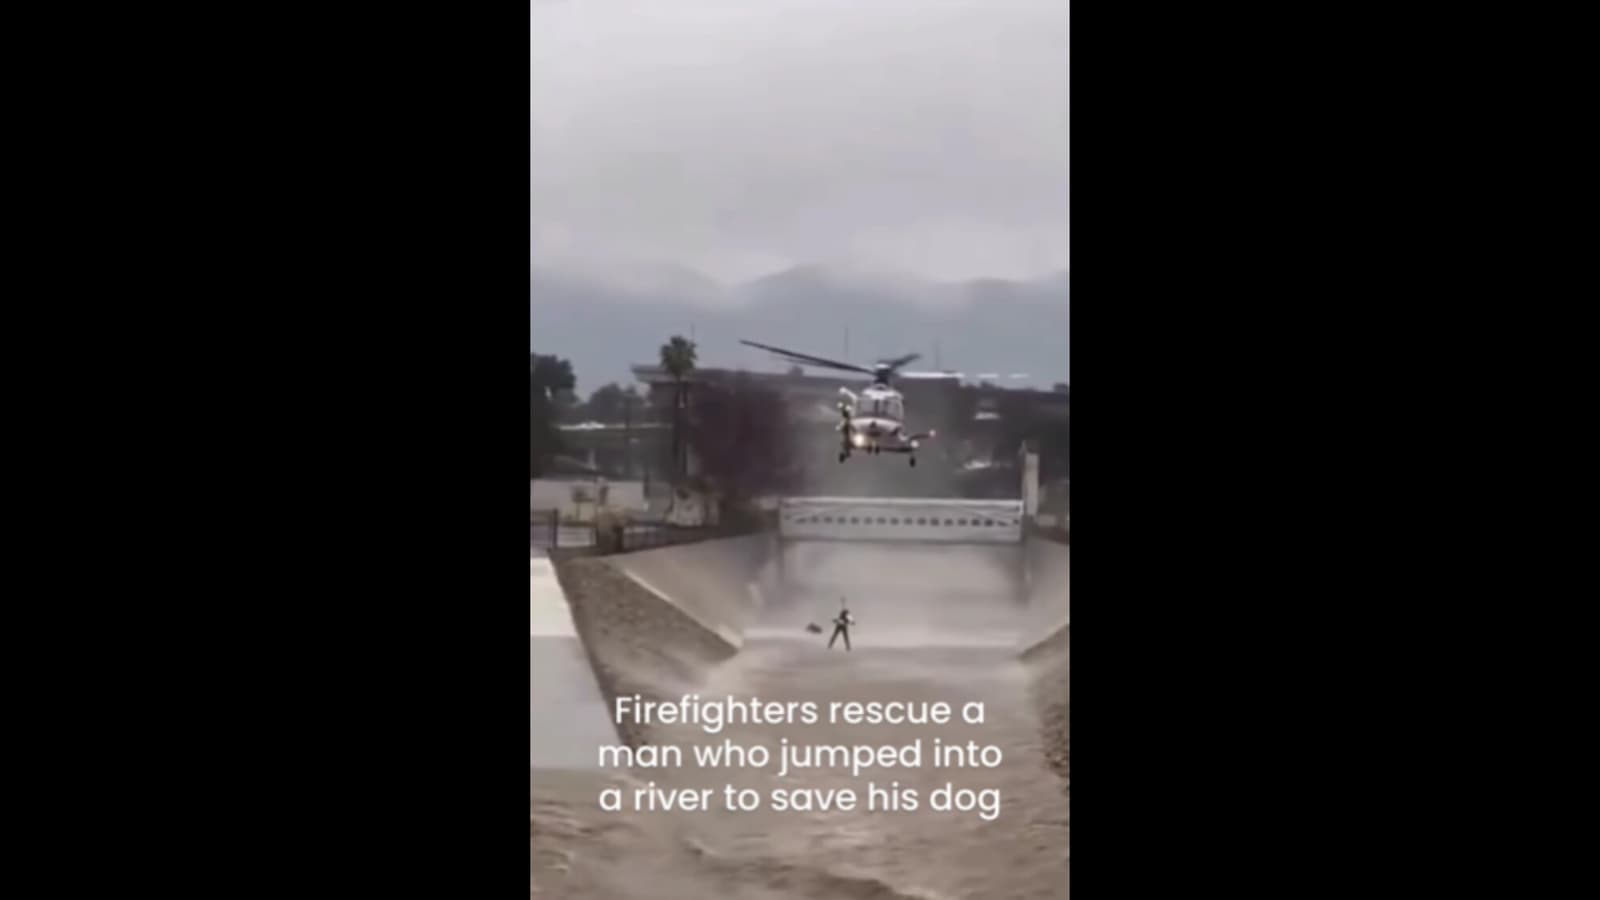 Firefighters rescue man who jumped into churning waters to save his dog. Watch